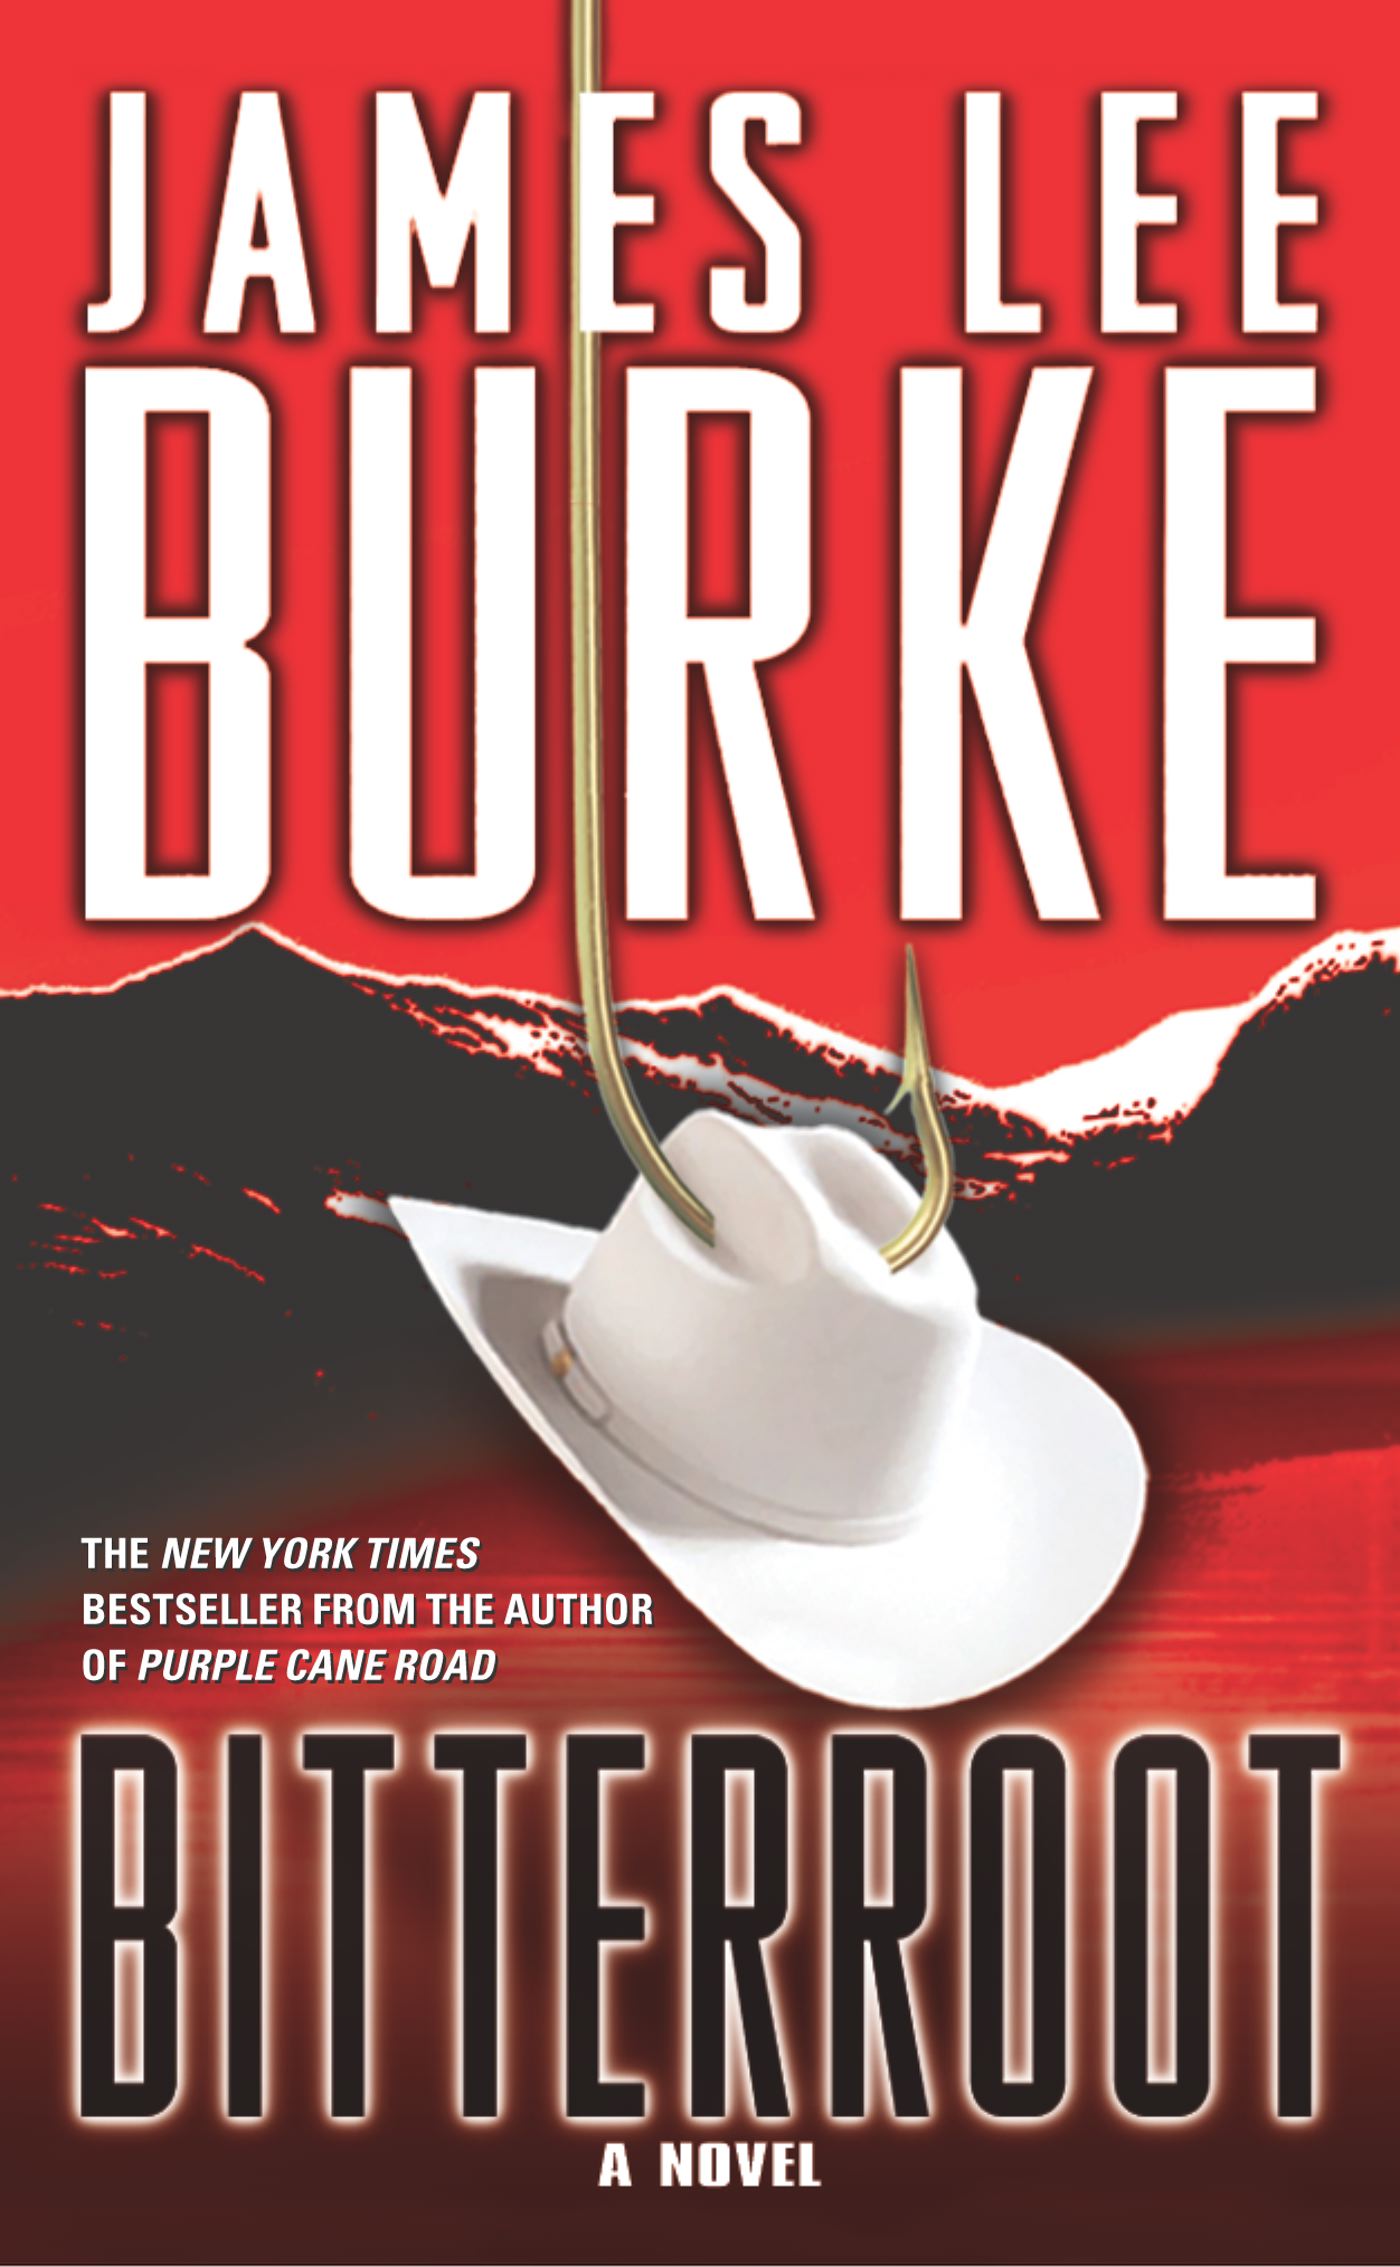 A Holland Family Novel: Bitterroot (Paperback) - image 1 of 1